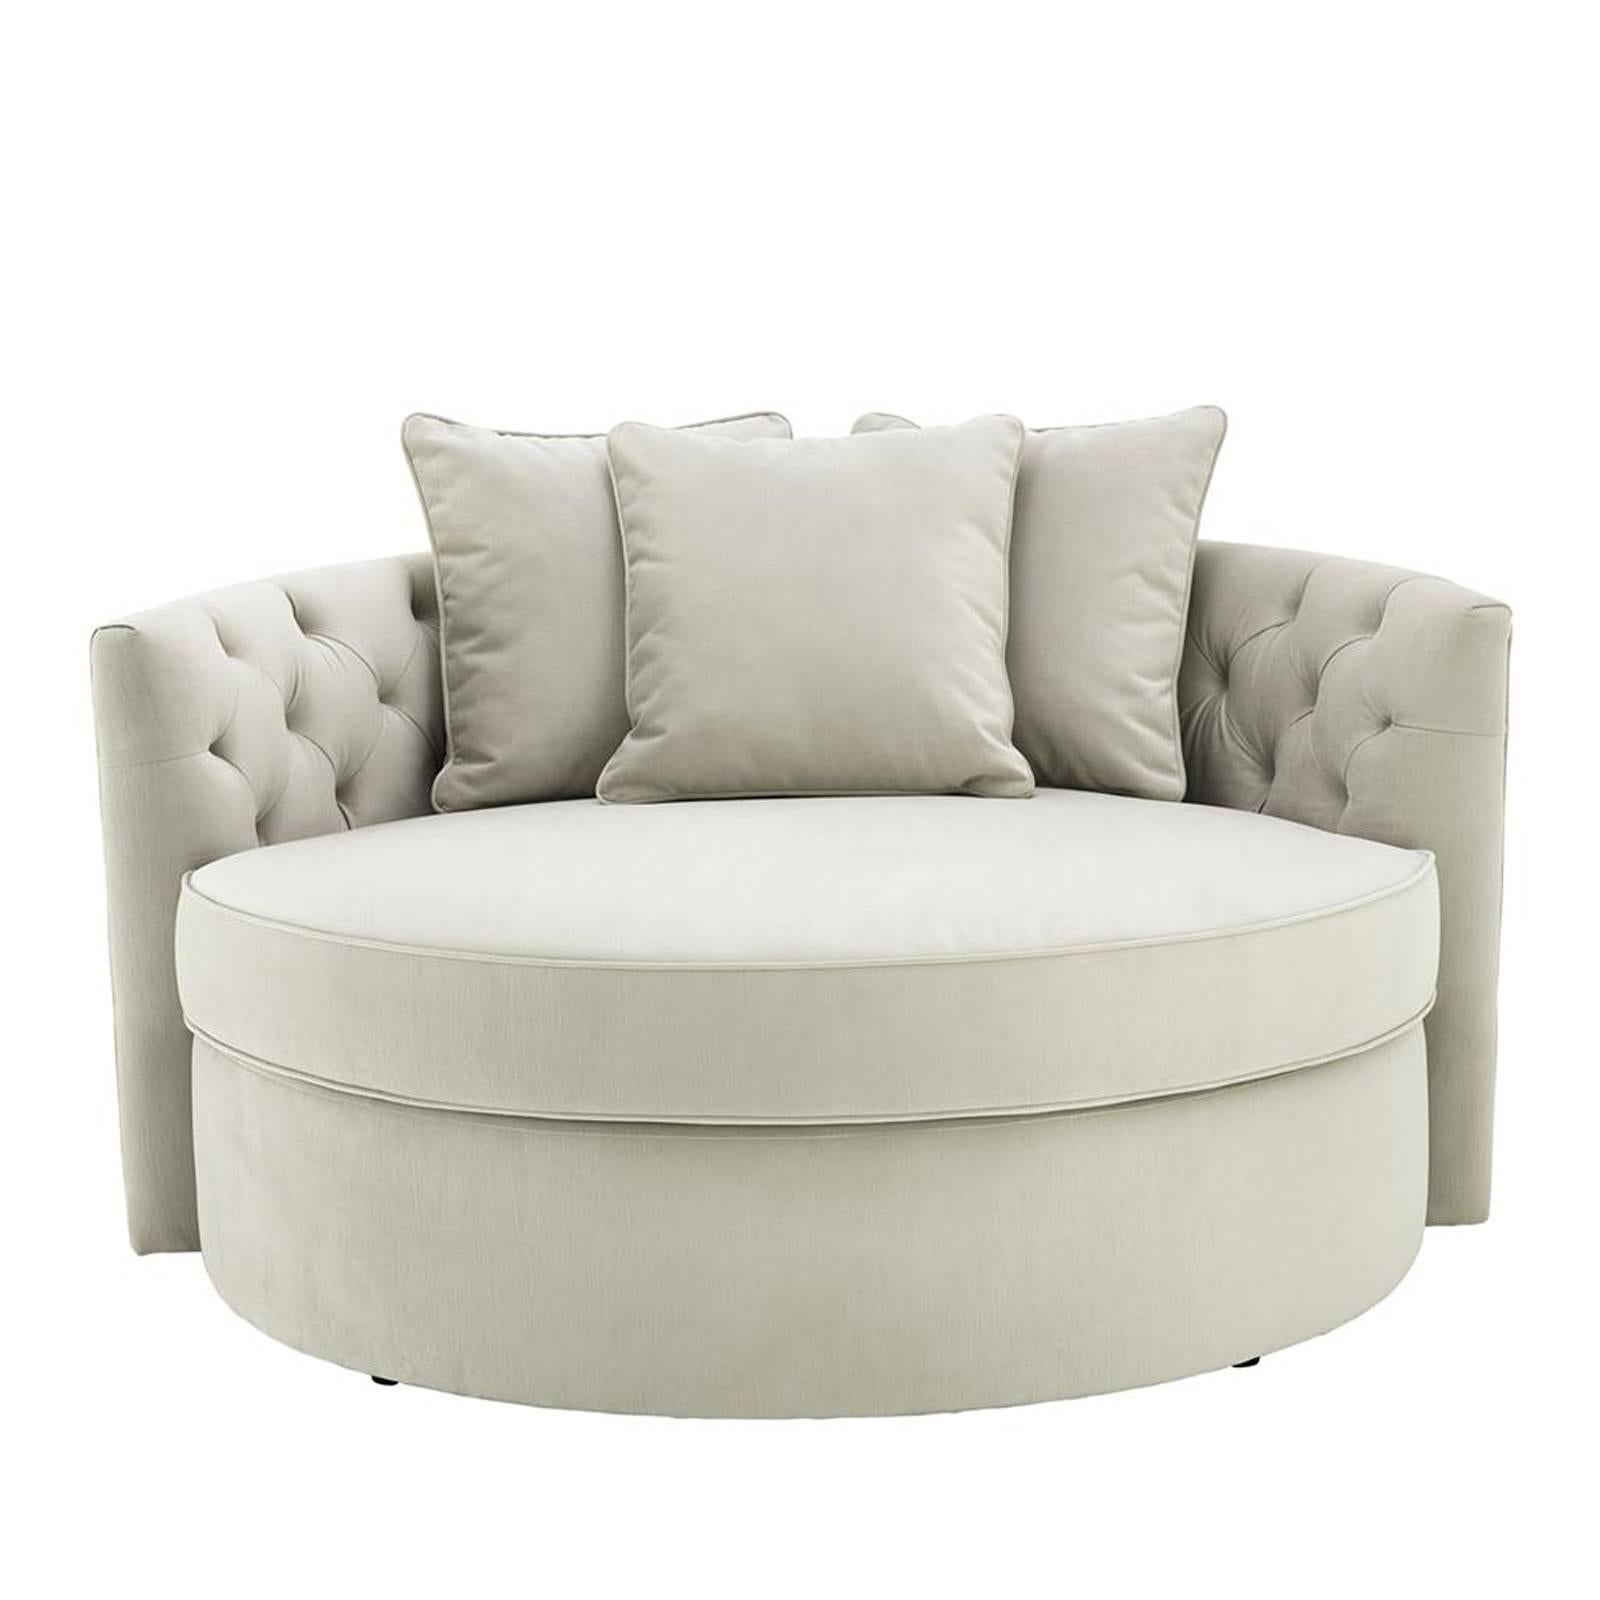 Round sofa Erganza with structure in solid wood.
Upholstered in pebble grey fabric. Fire retardant
treatment. Also available in Sofa Erganza M and
Sofa Erganza L.
